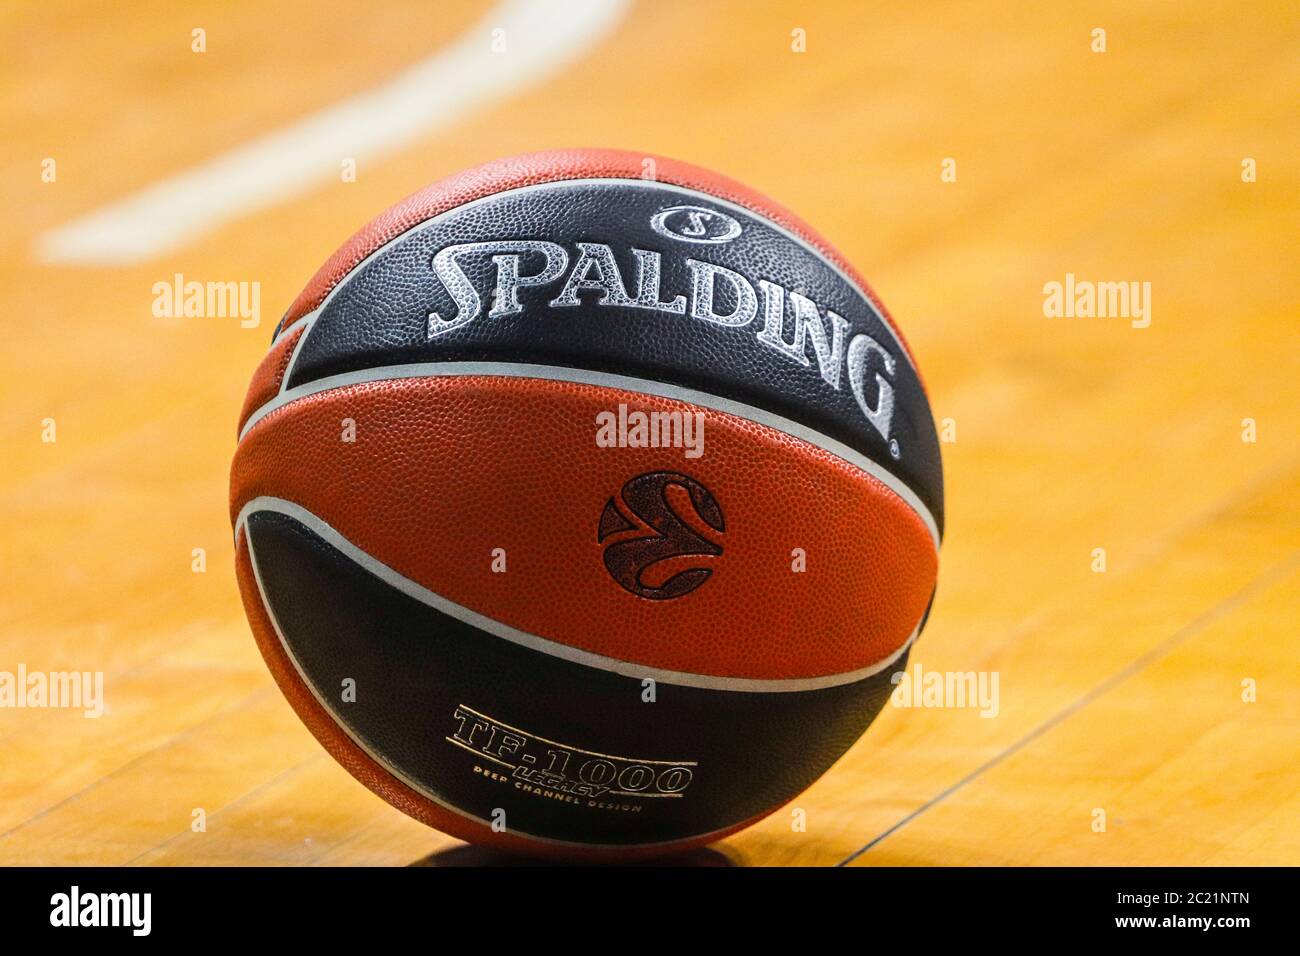 ISTANBUL / TURKEY - FEBRUARY 20, 2020: EuroLeague ball during EuroLeague 2019-20 Round 24 basketball game between Fenerbahce and Real Madrid at Ulker Sports Arena. Stock Photo